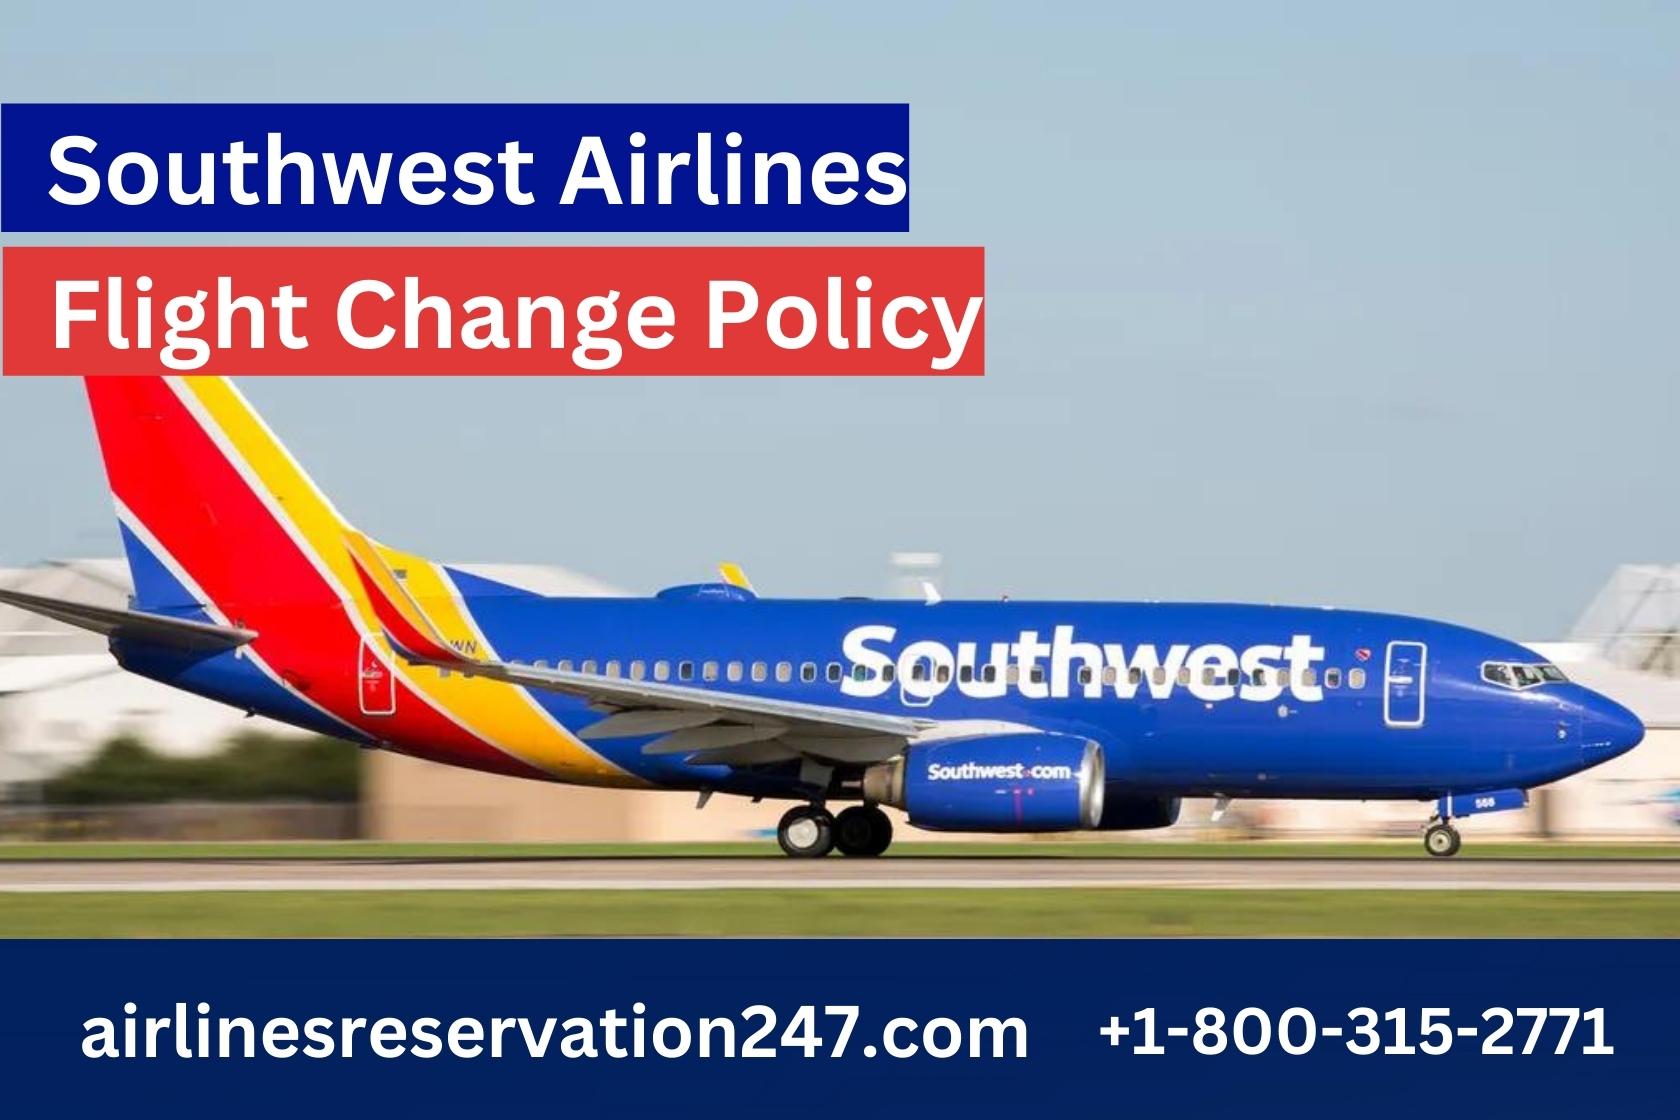 Southwest Airlines Flight Change Policy